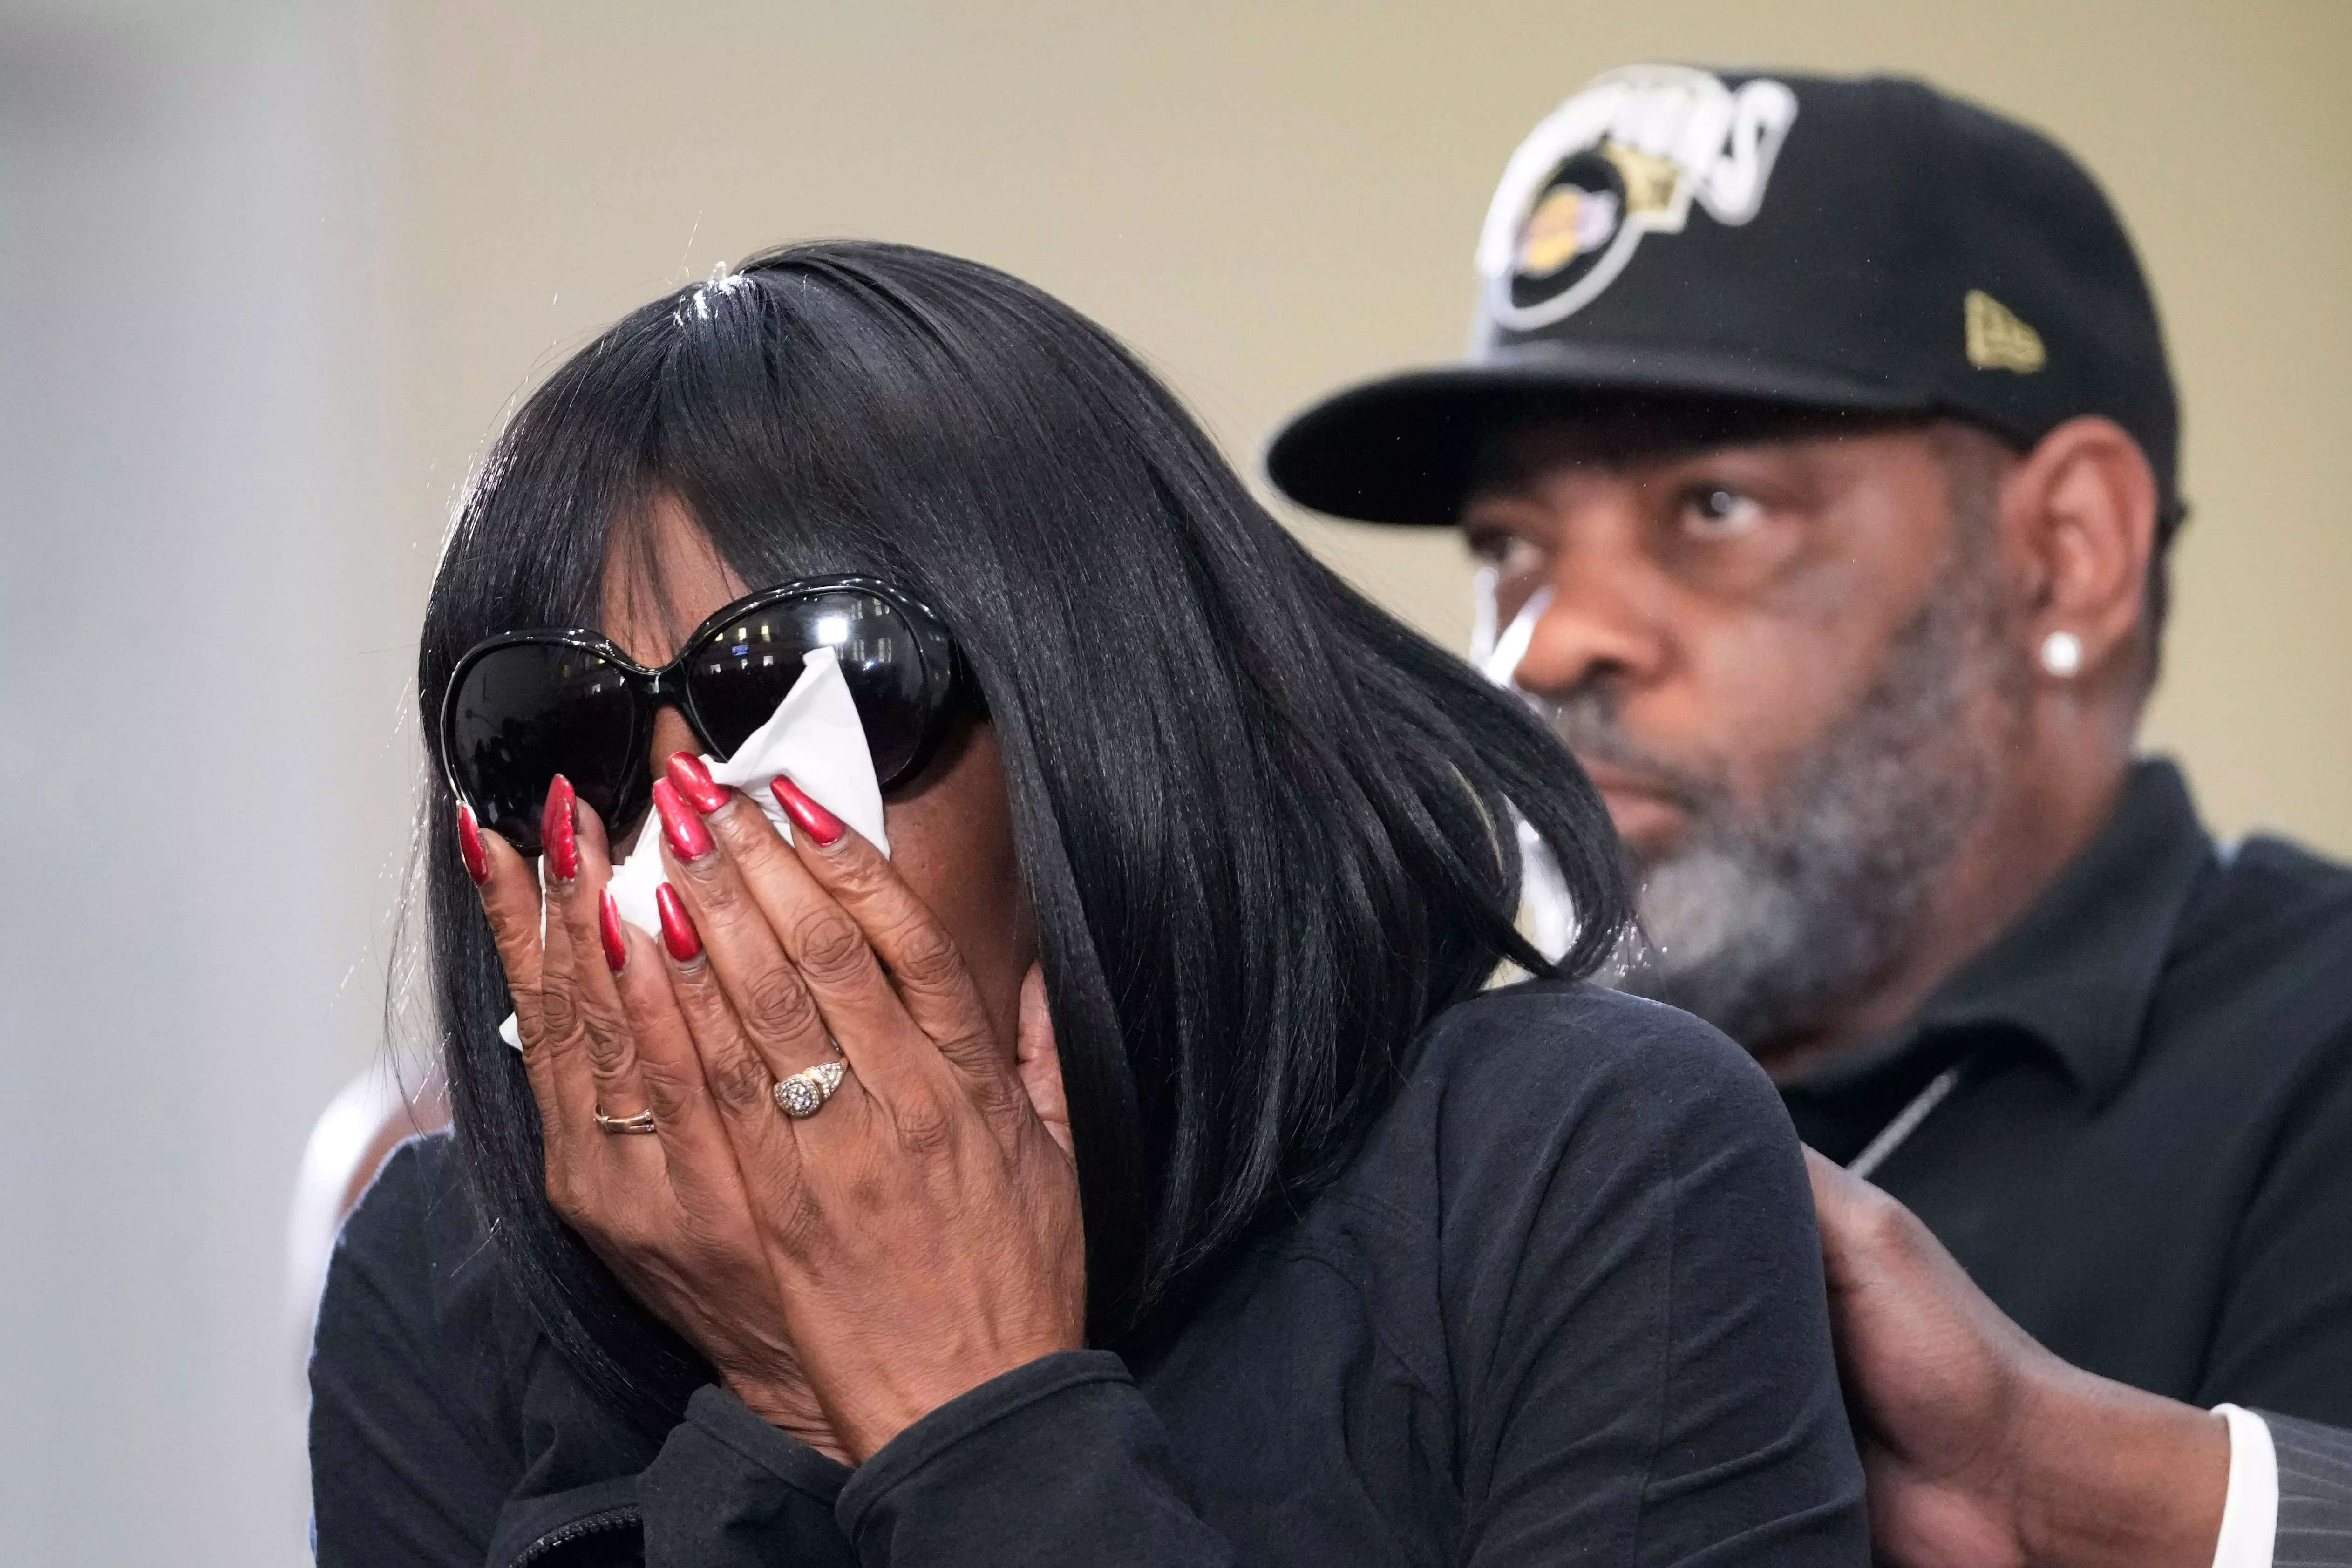 RowVaughn Wells, mother of Tyre Nichols, who died after being beaten by Memphis police officers, cries as she is comforted by Tyre